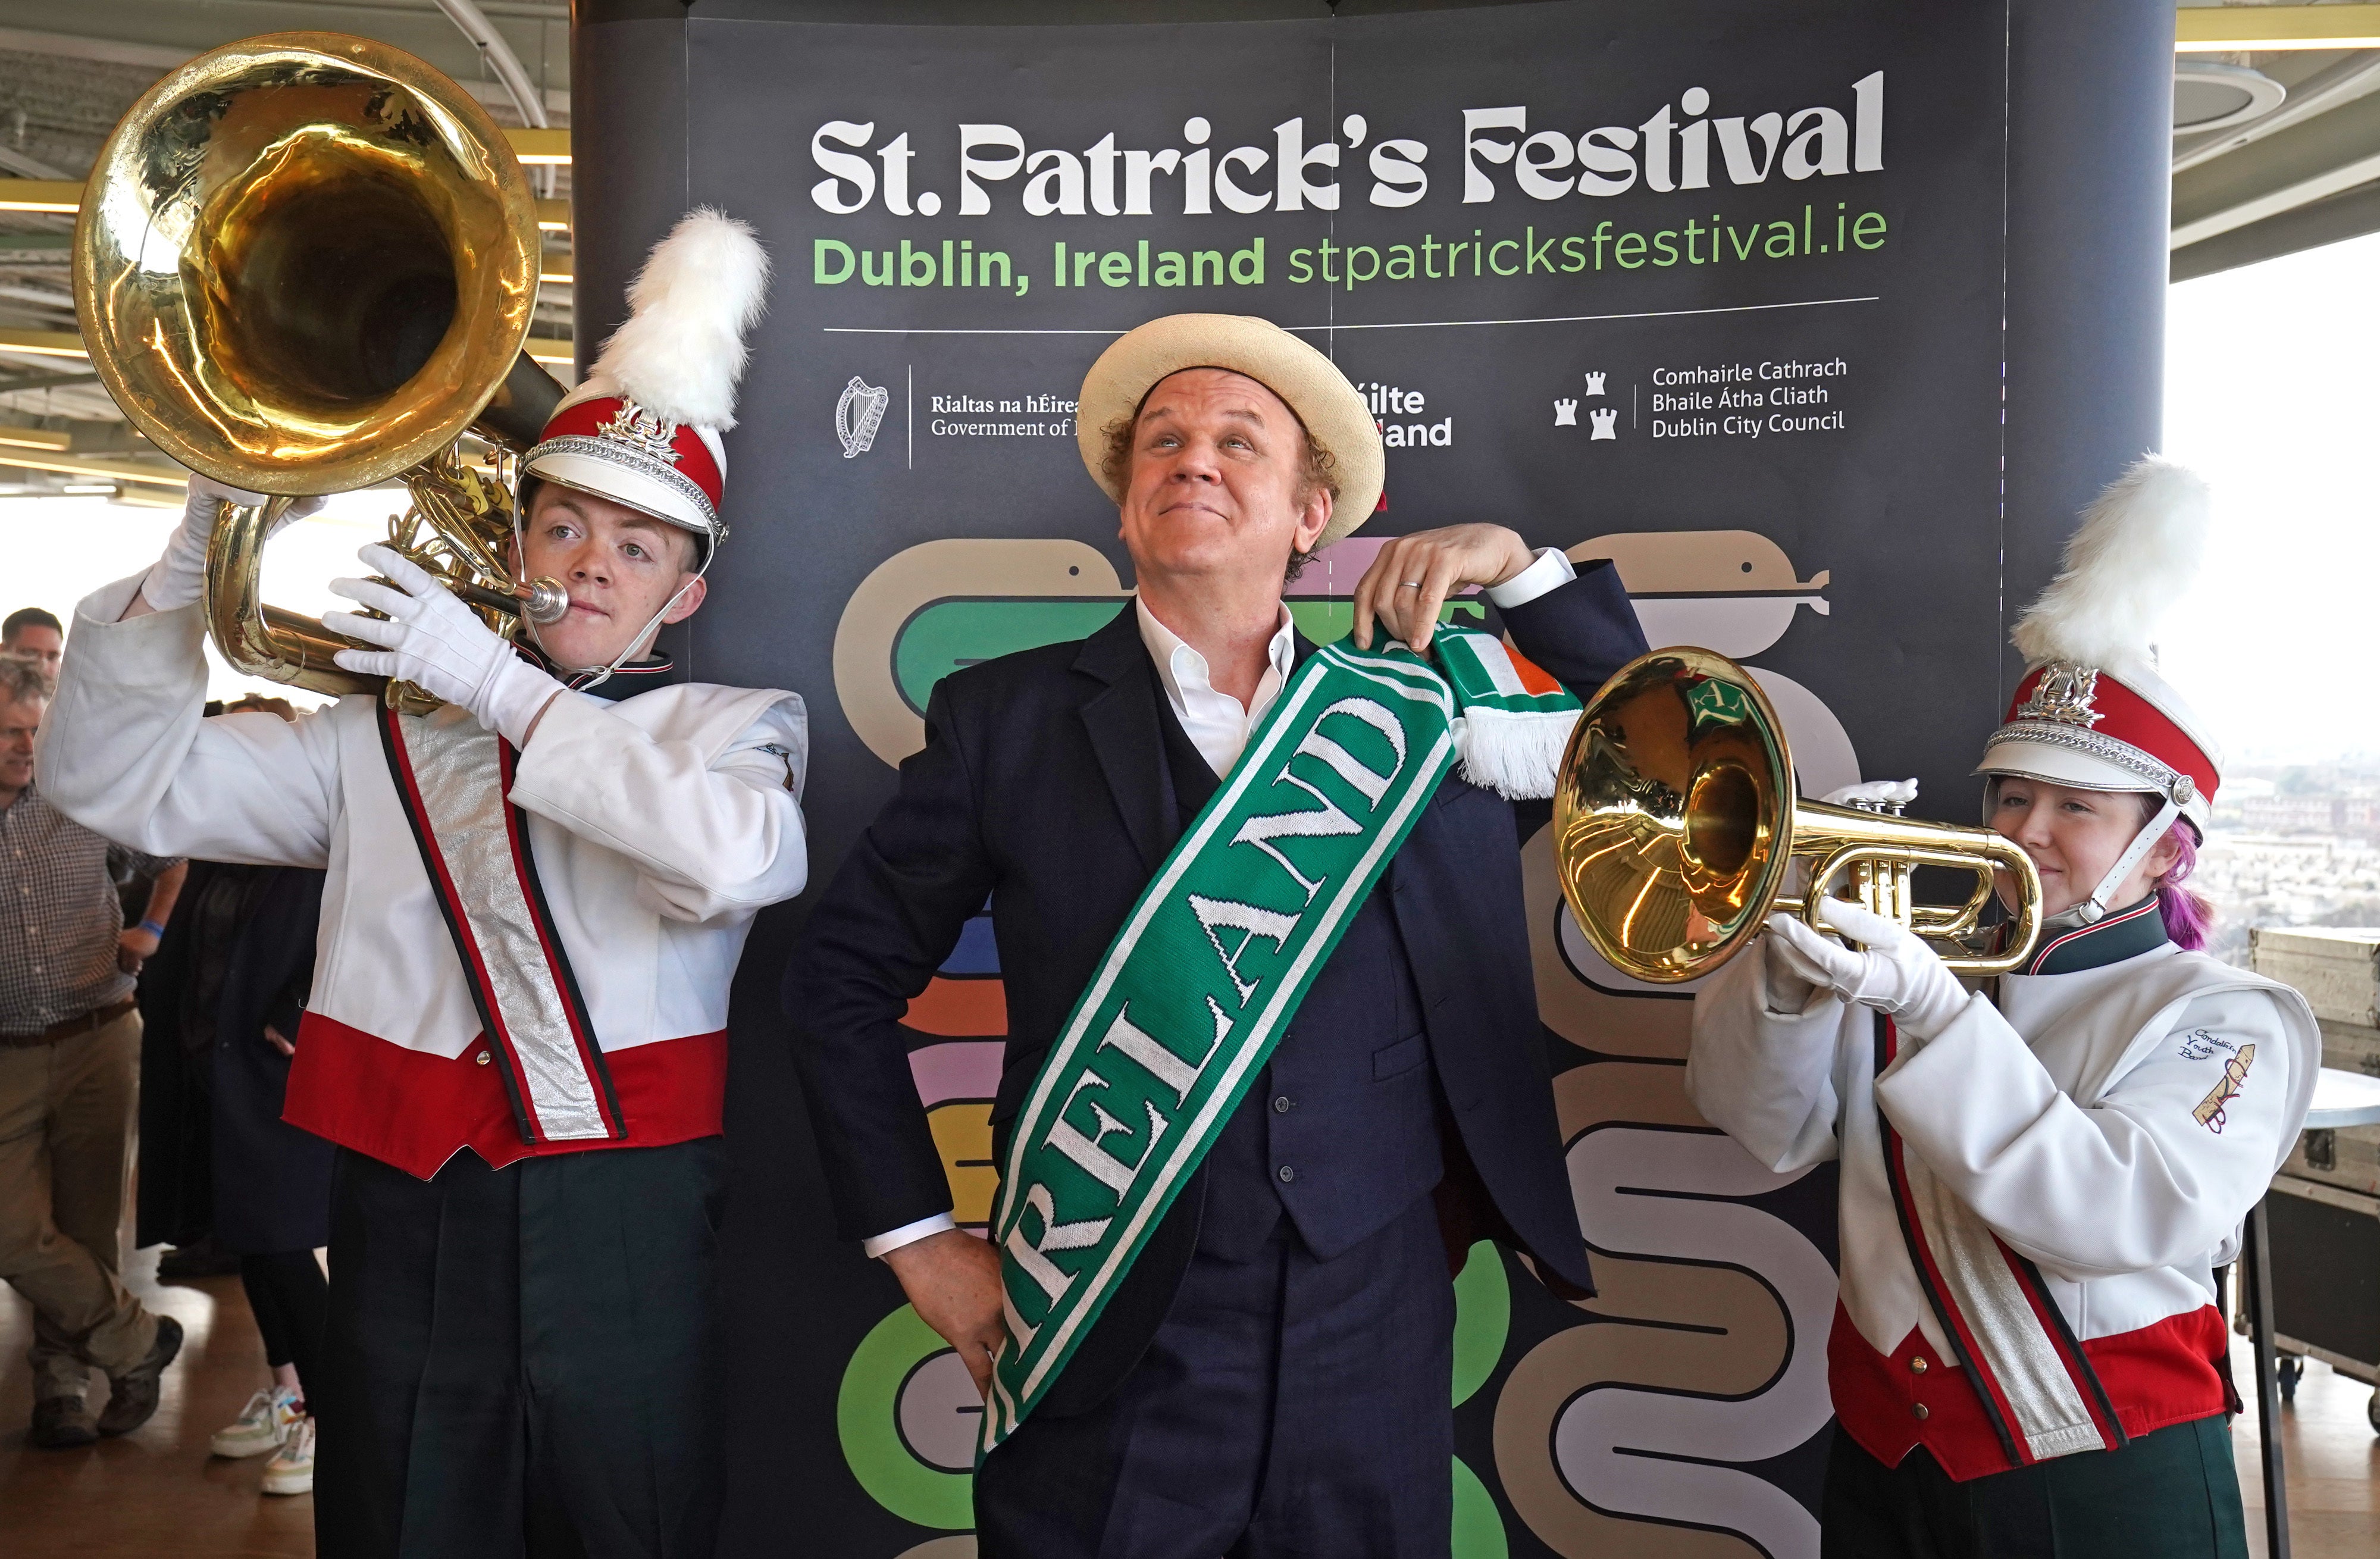 Hollywood actor John C Reilly is the international guest of honour at the Dublin parade (Brian Lawless/PA)